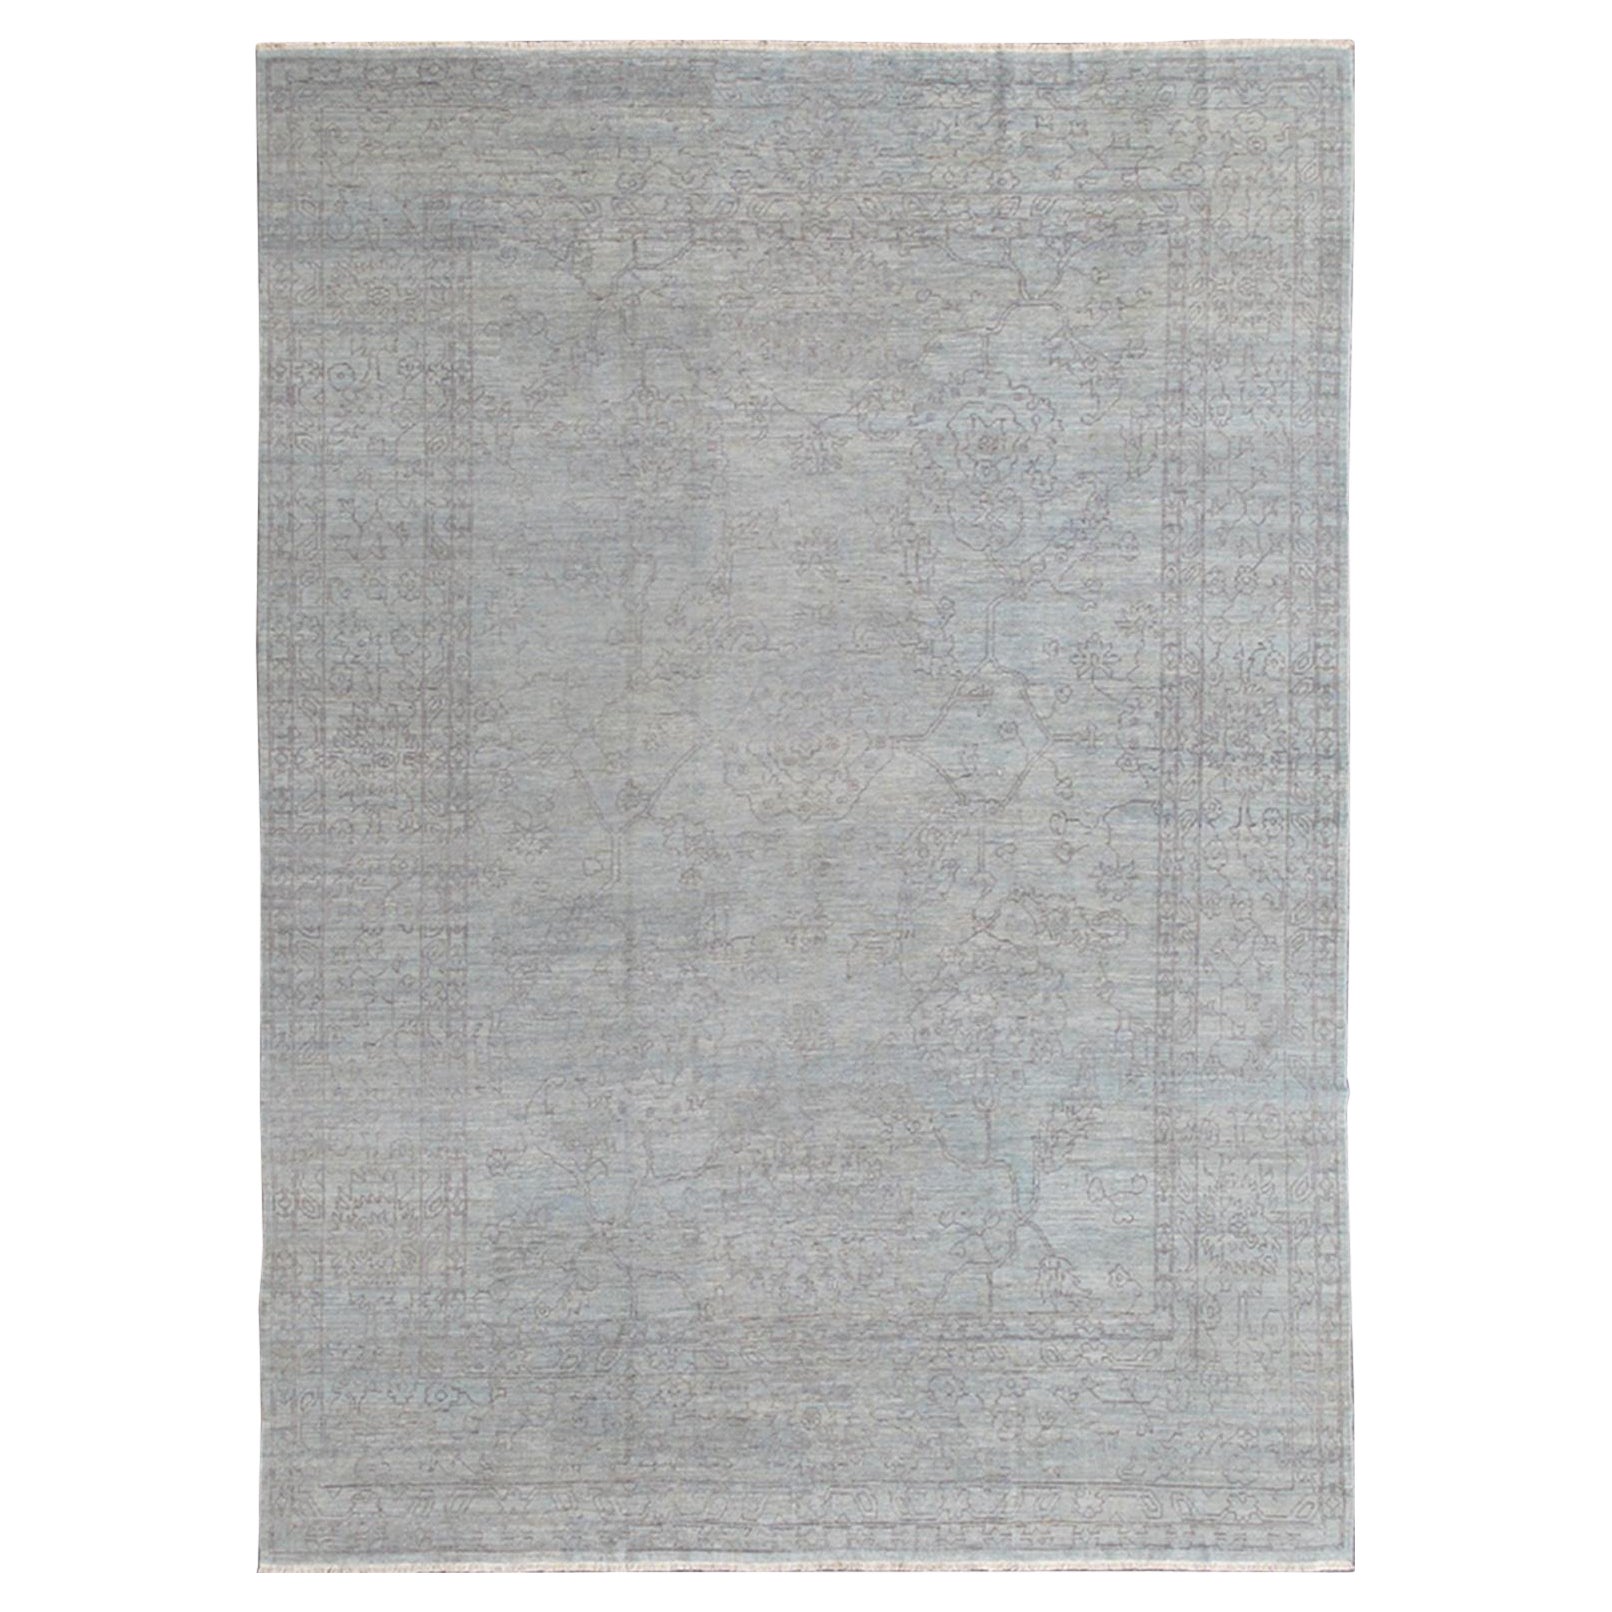  Fine Transitional Rug with Stylized Geometric Motifs in Lavender and Light Blue